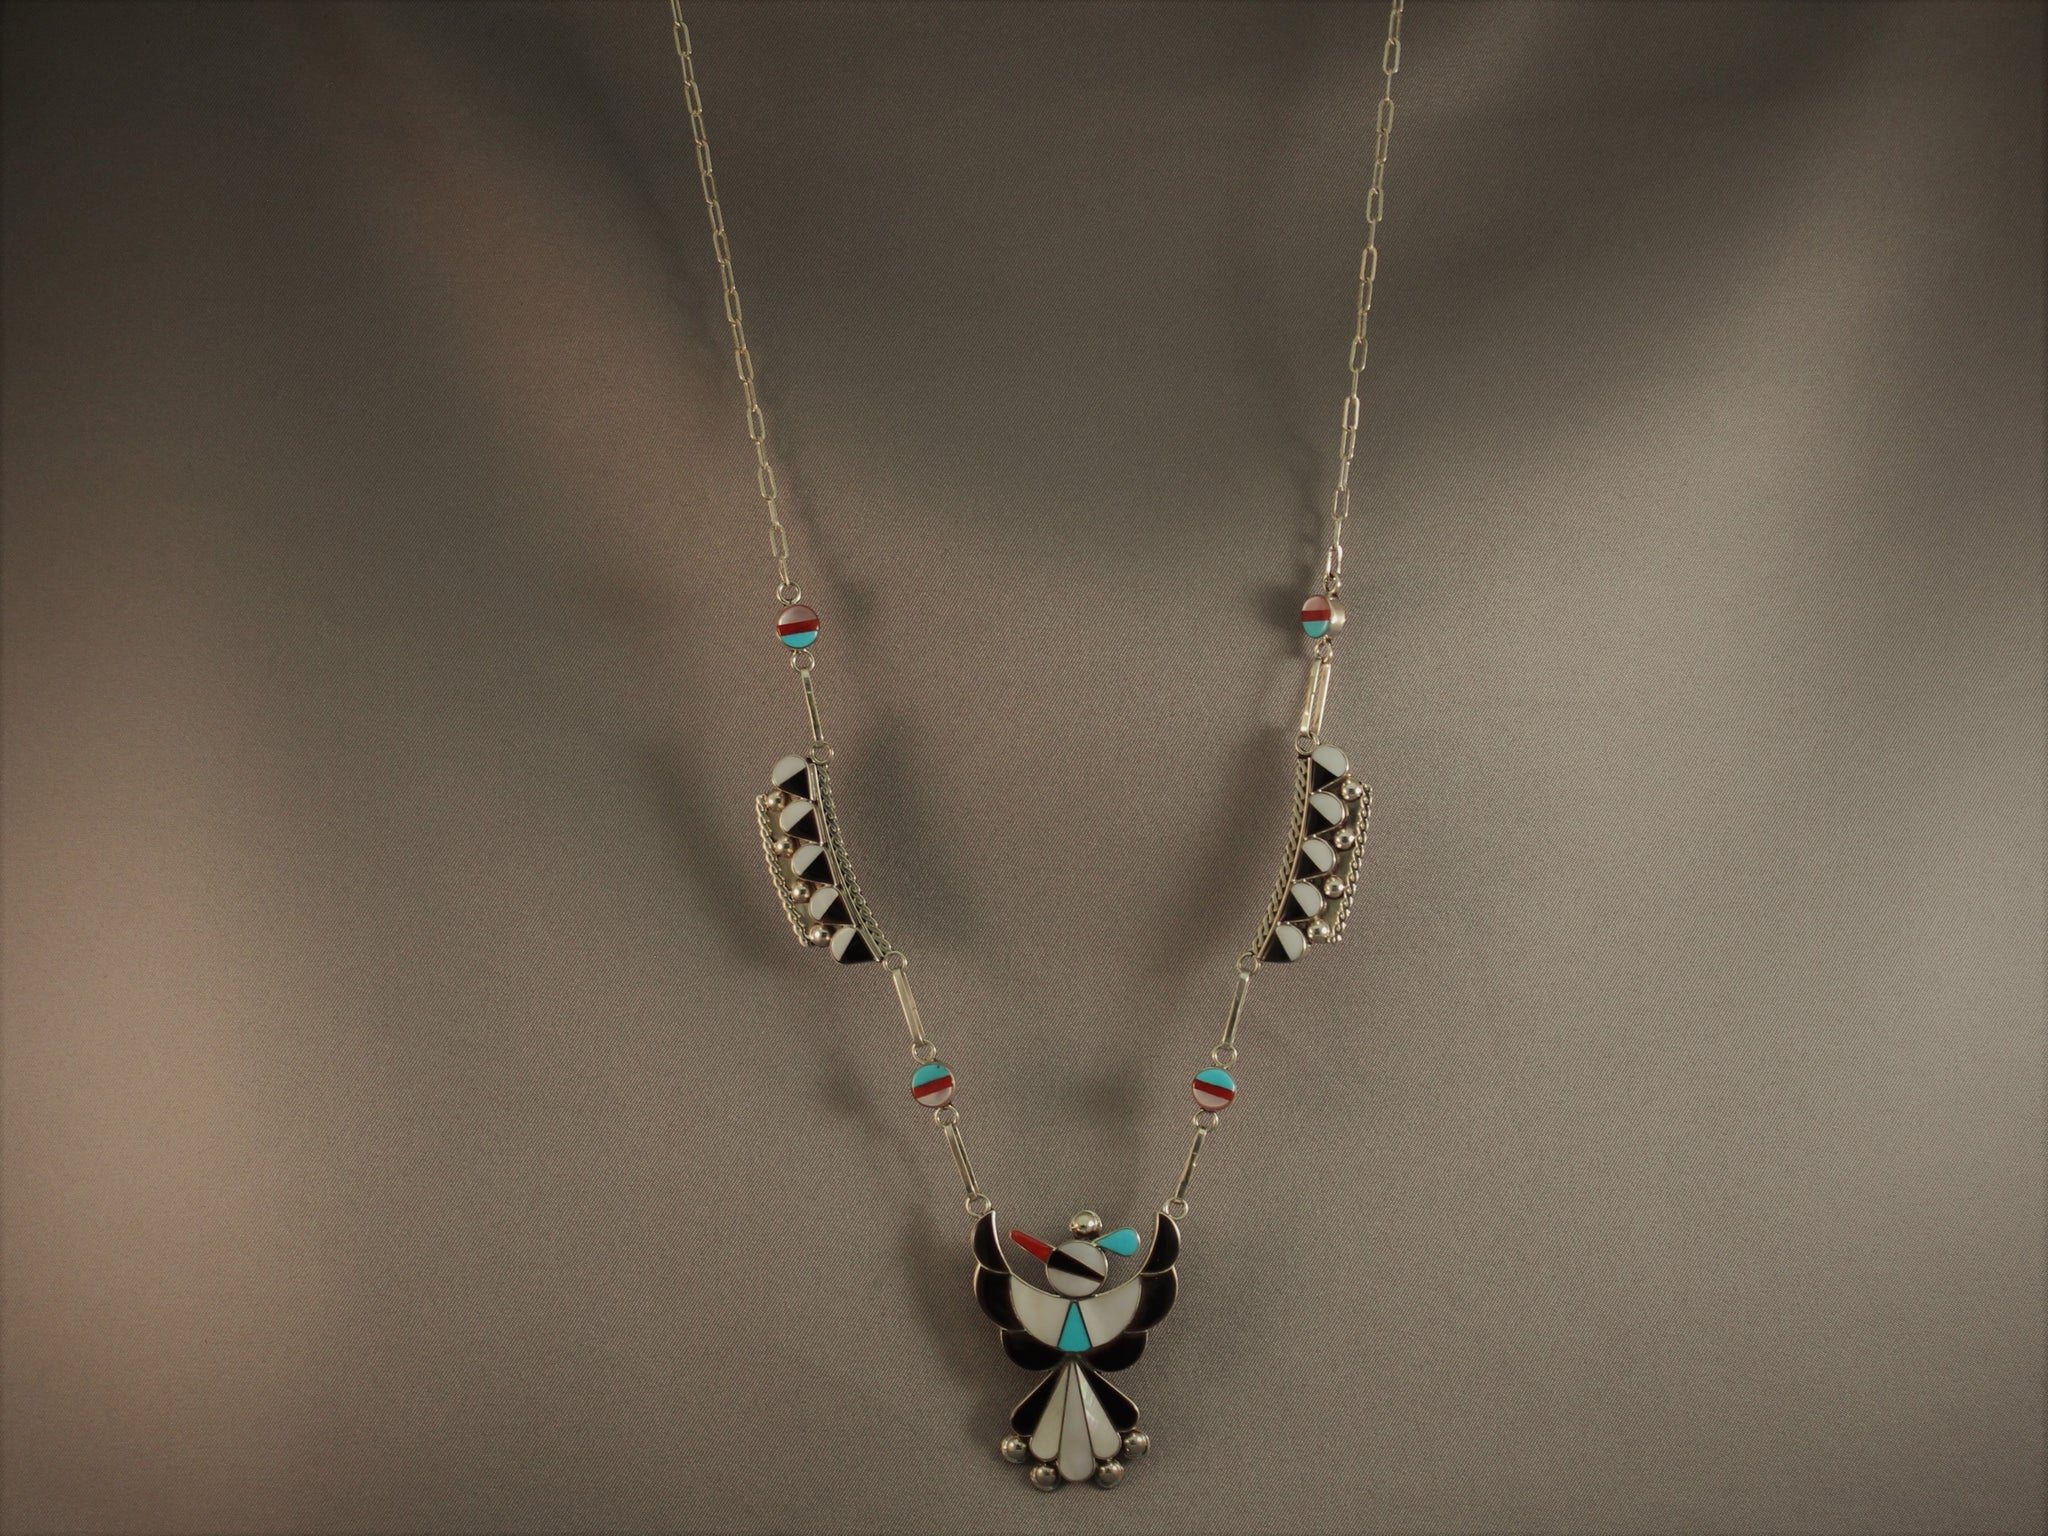 Knifewing Necklace Set